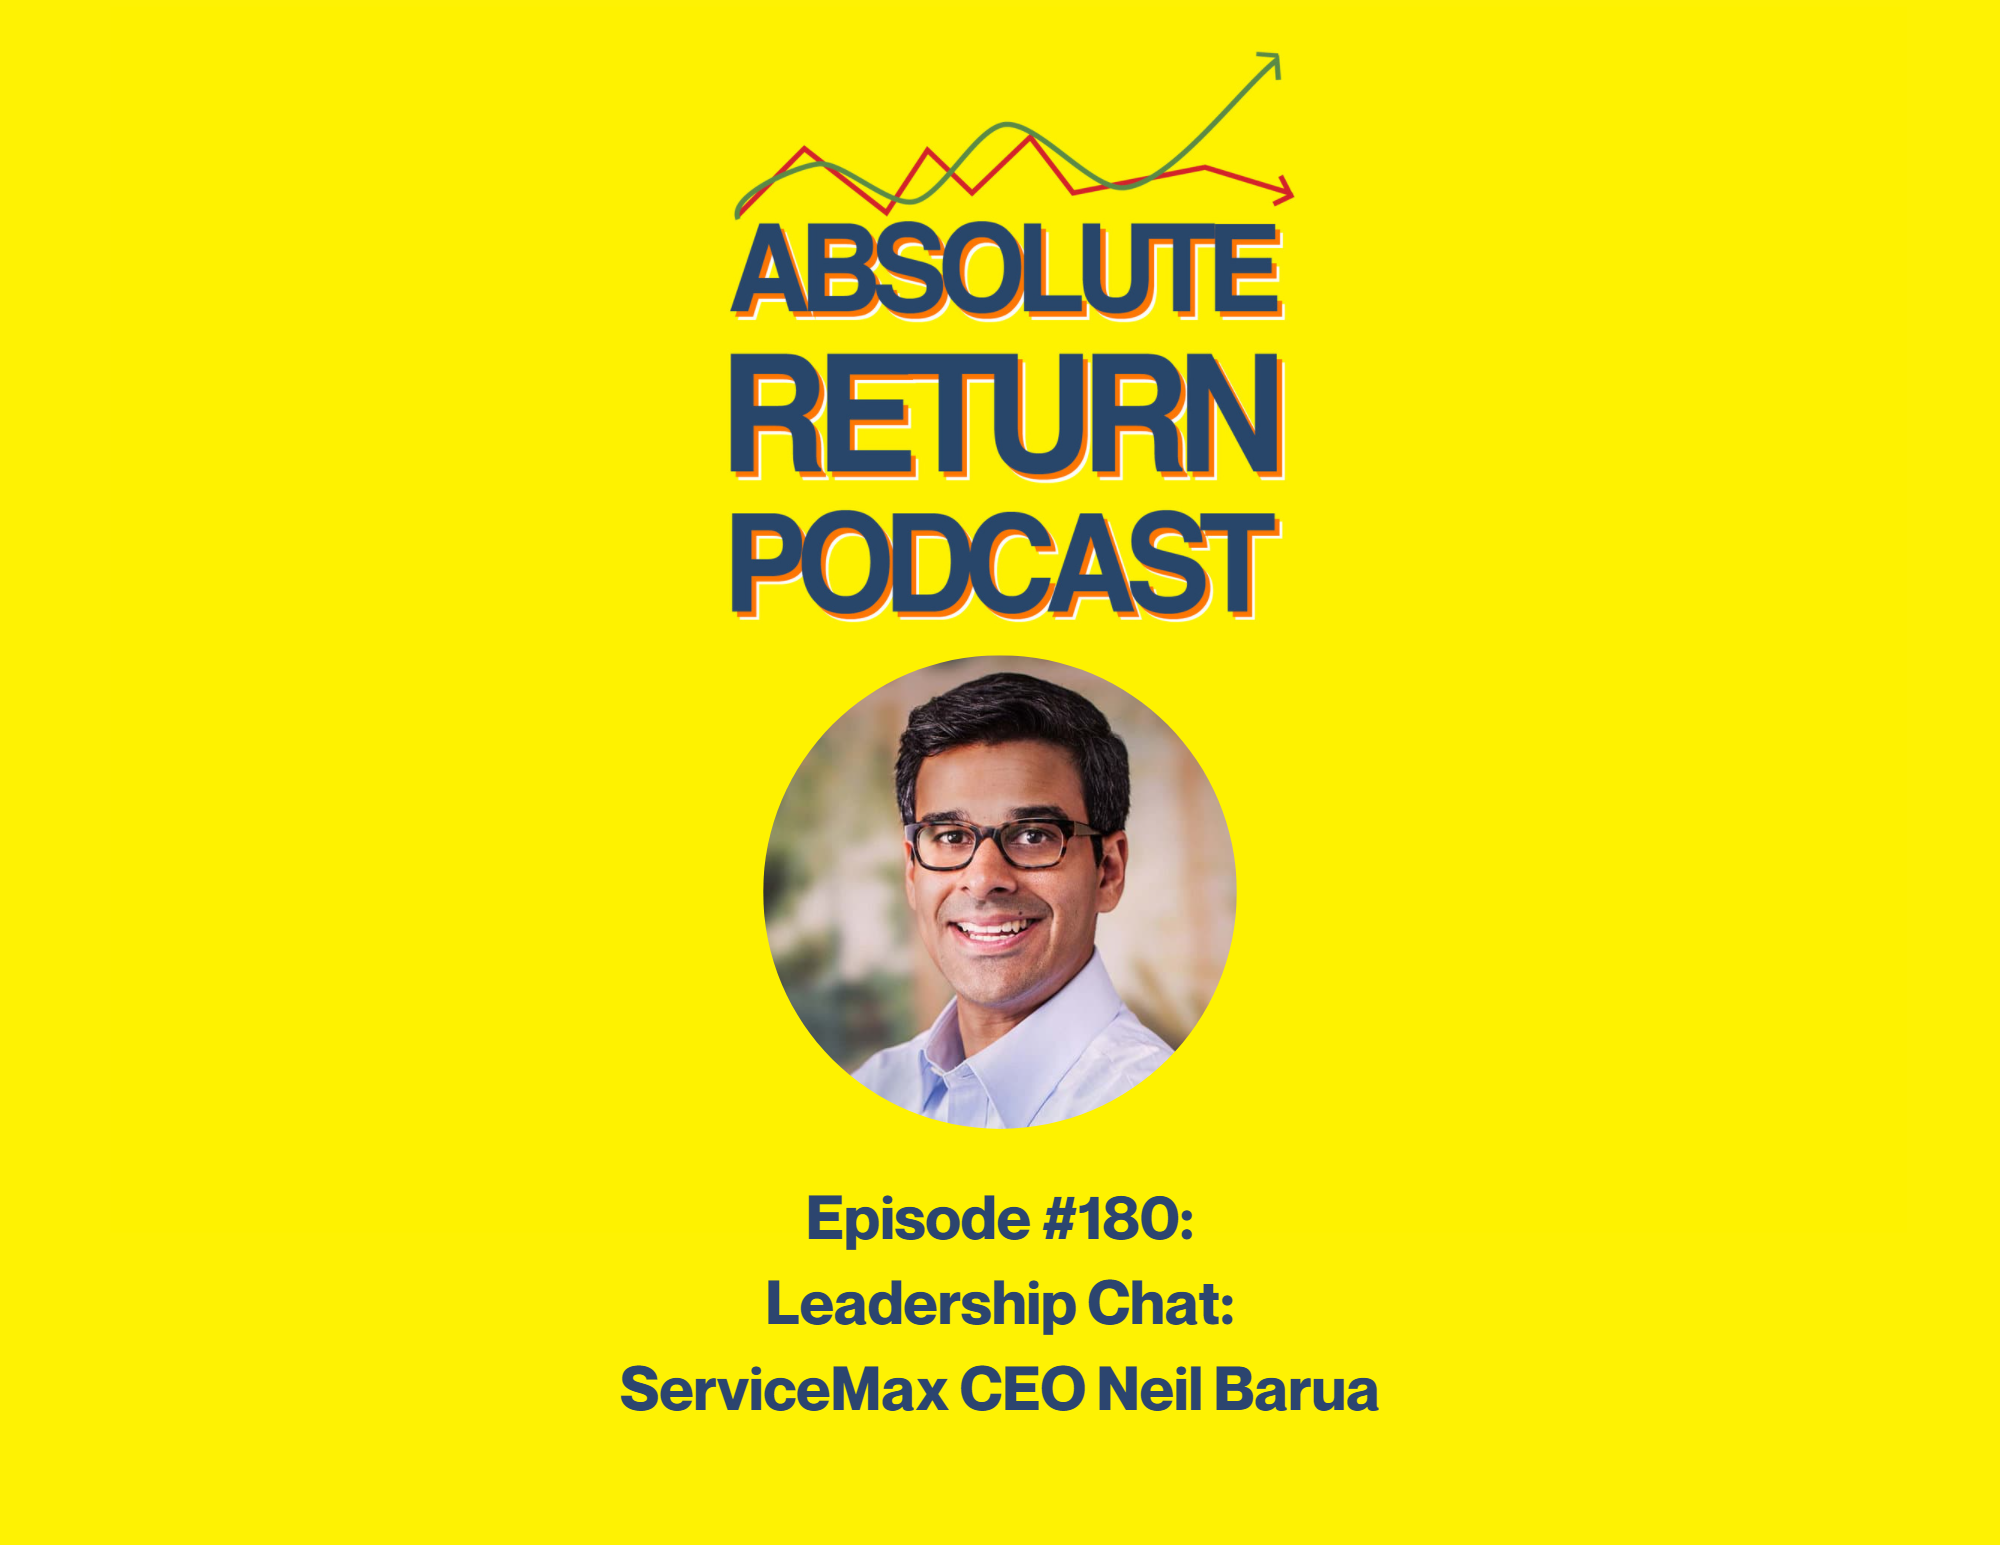 Absolute Return Podcast #180: Leadership Chat: ServiceMax CEO Neil Barua